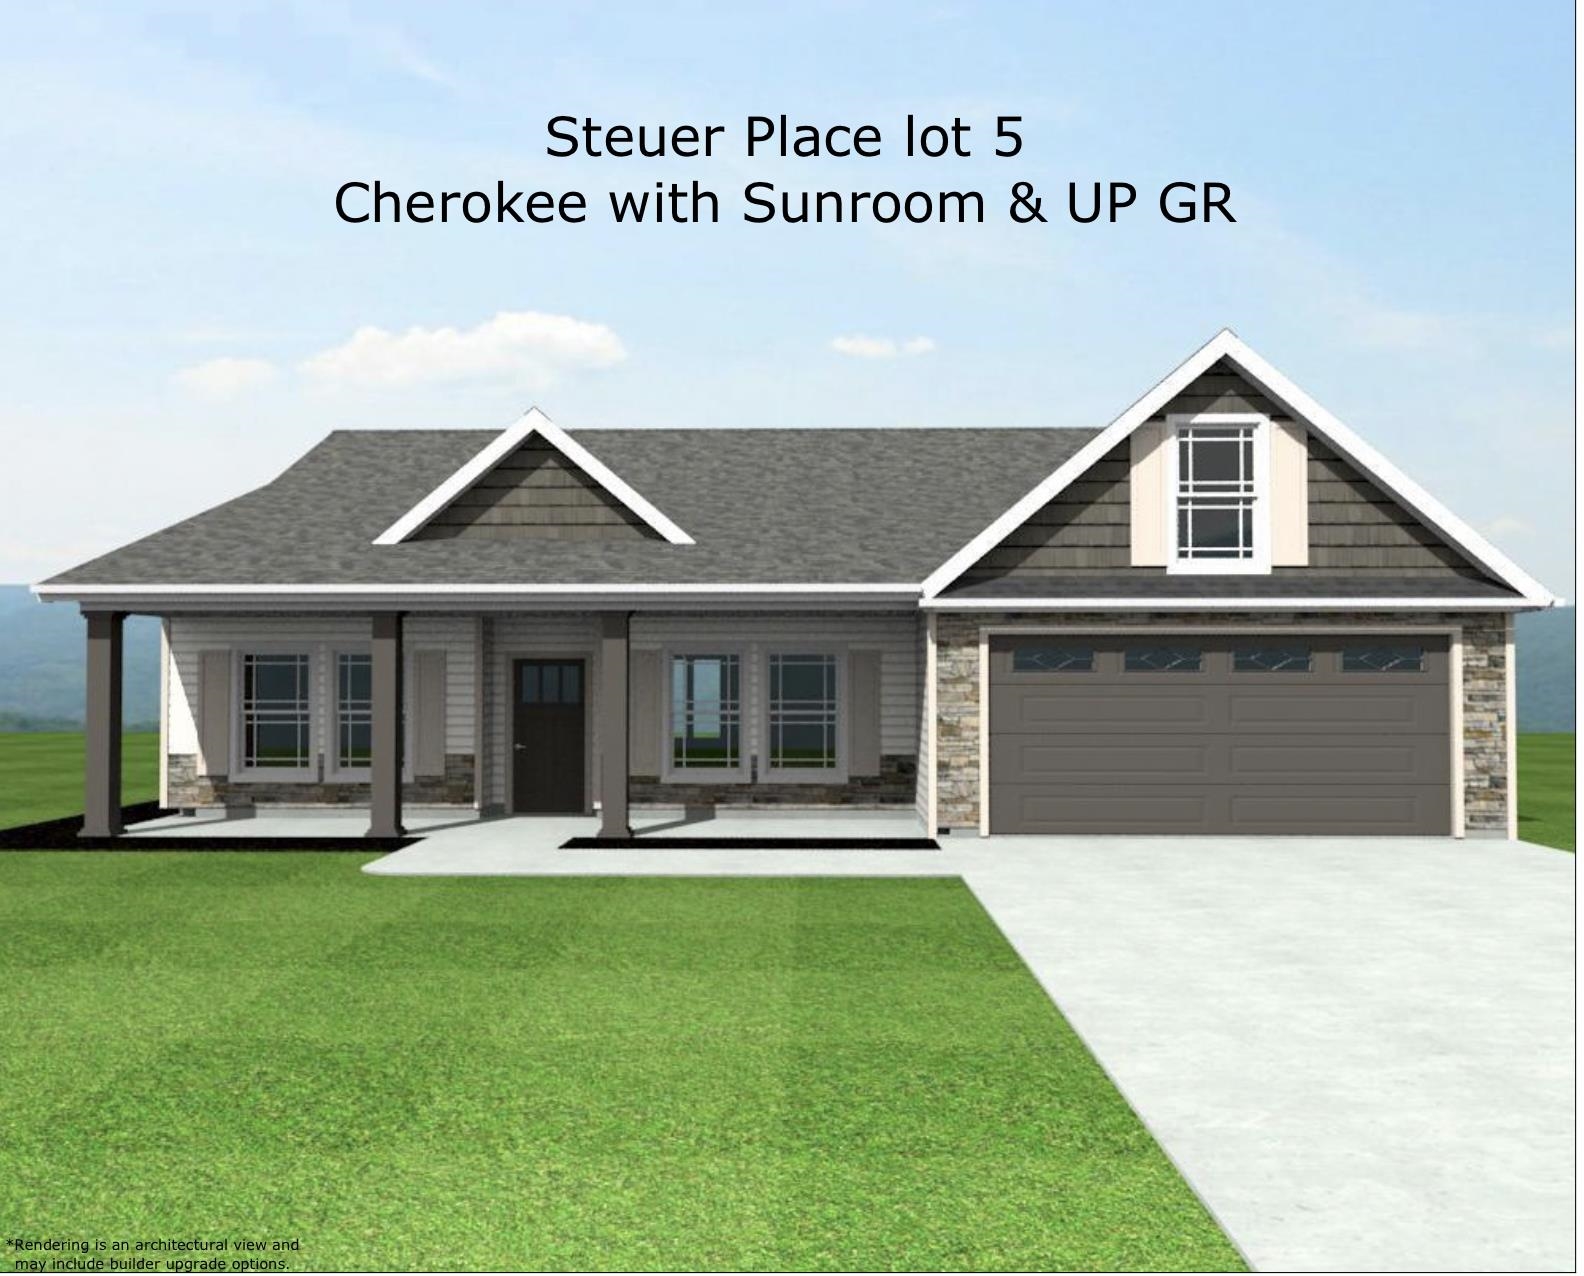 The Cherokee plan.  This spacious 3 bedroom plan offers an office and sunroom with a 12'x12' covered back patio.